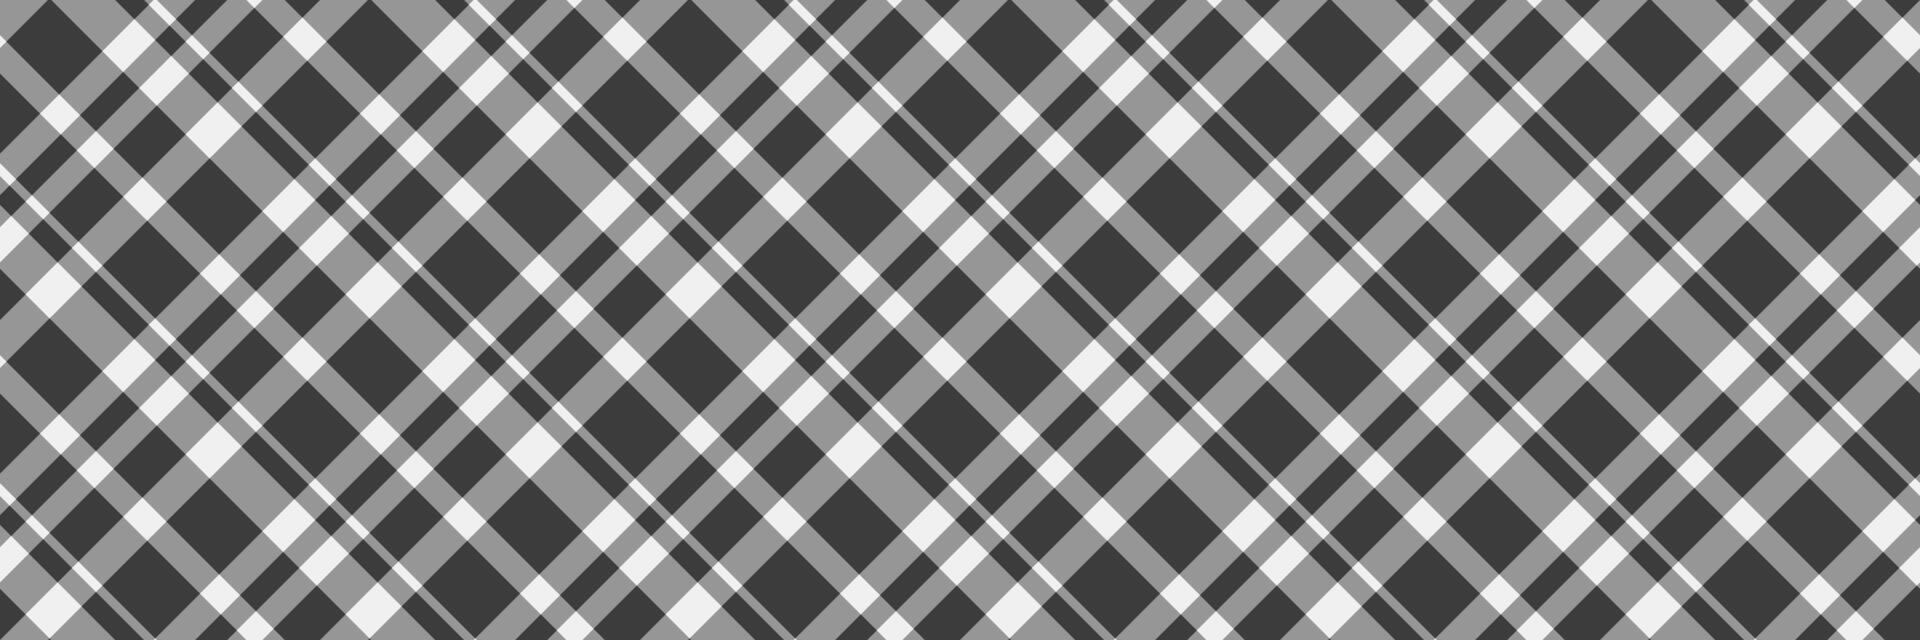 Custom tartan vector background, real check plaid pattern. Industry seamless textile fabric texture in vintage gray and grey colors.